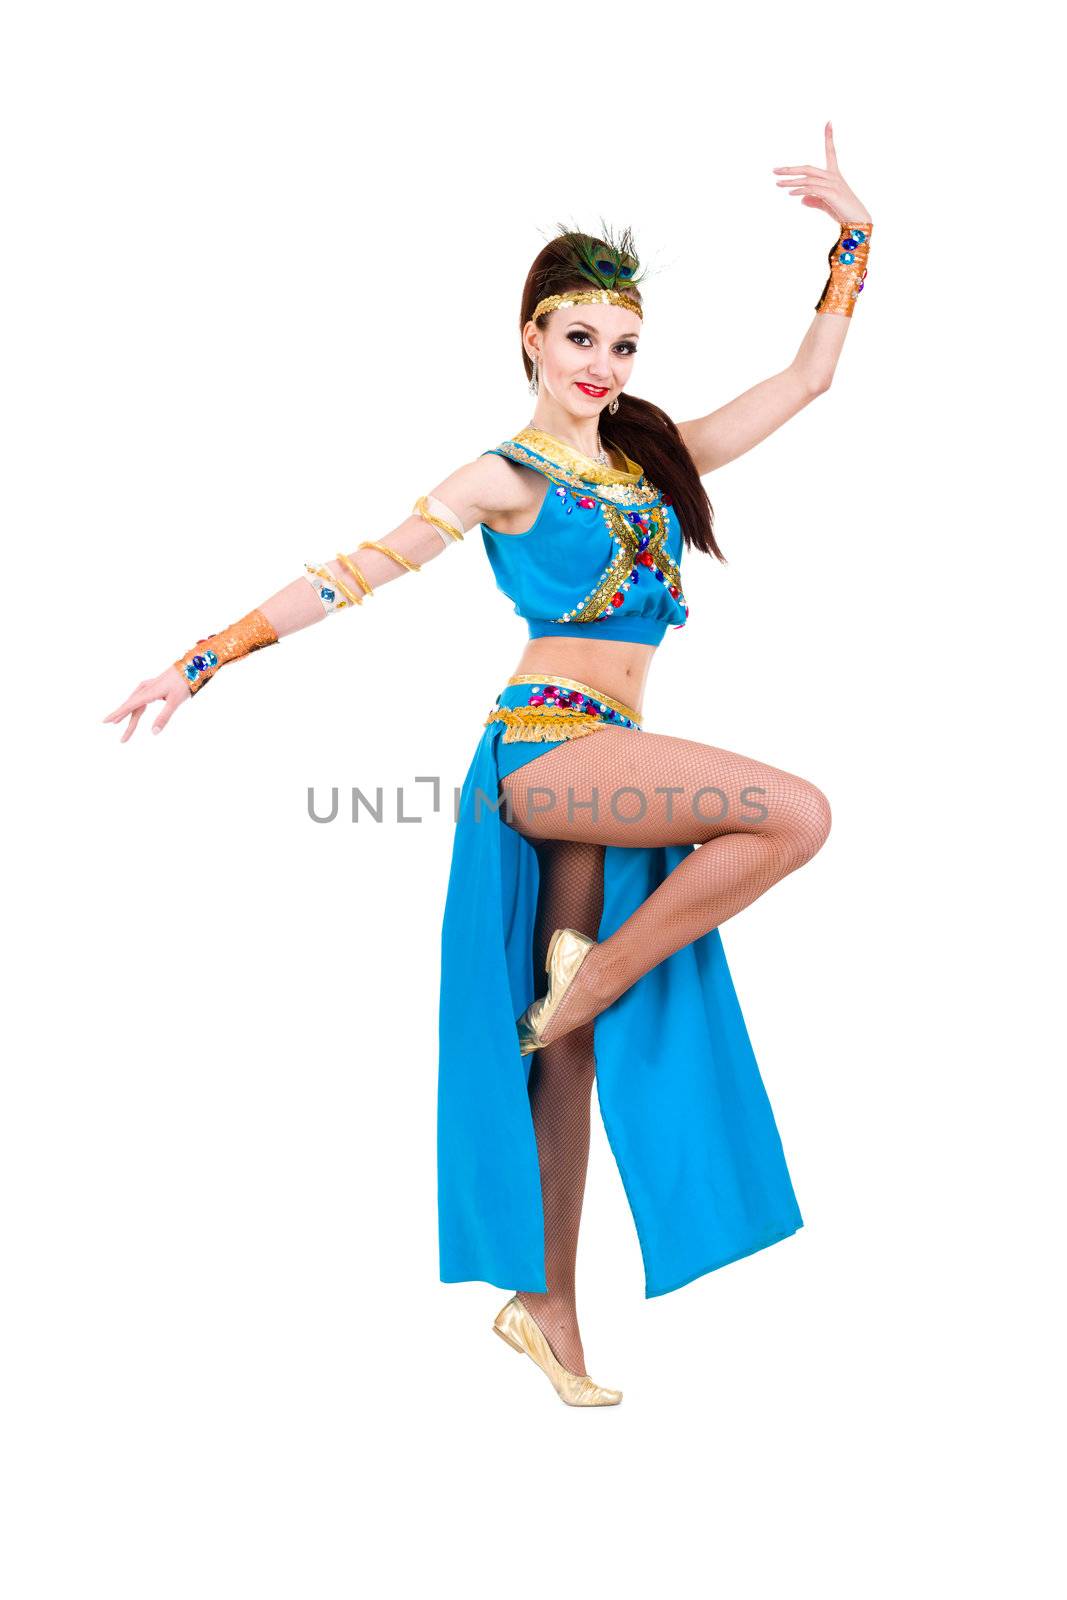 Dancing pharaoh woman wearing a egyptian costume. Isolated on white background in full length.